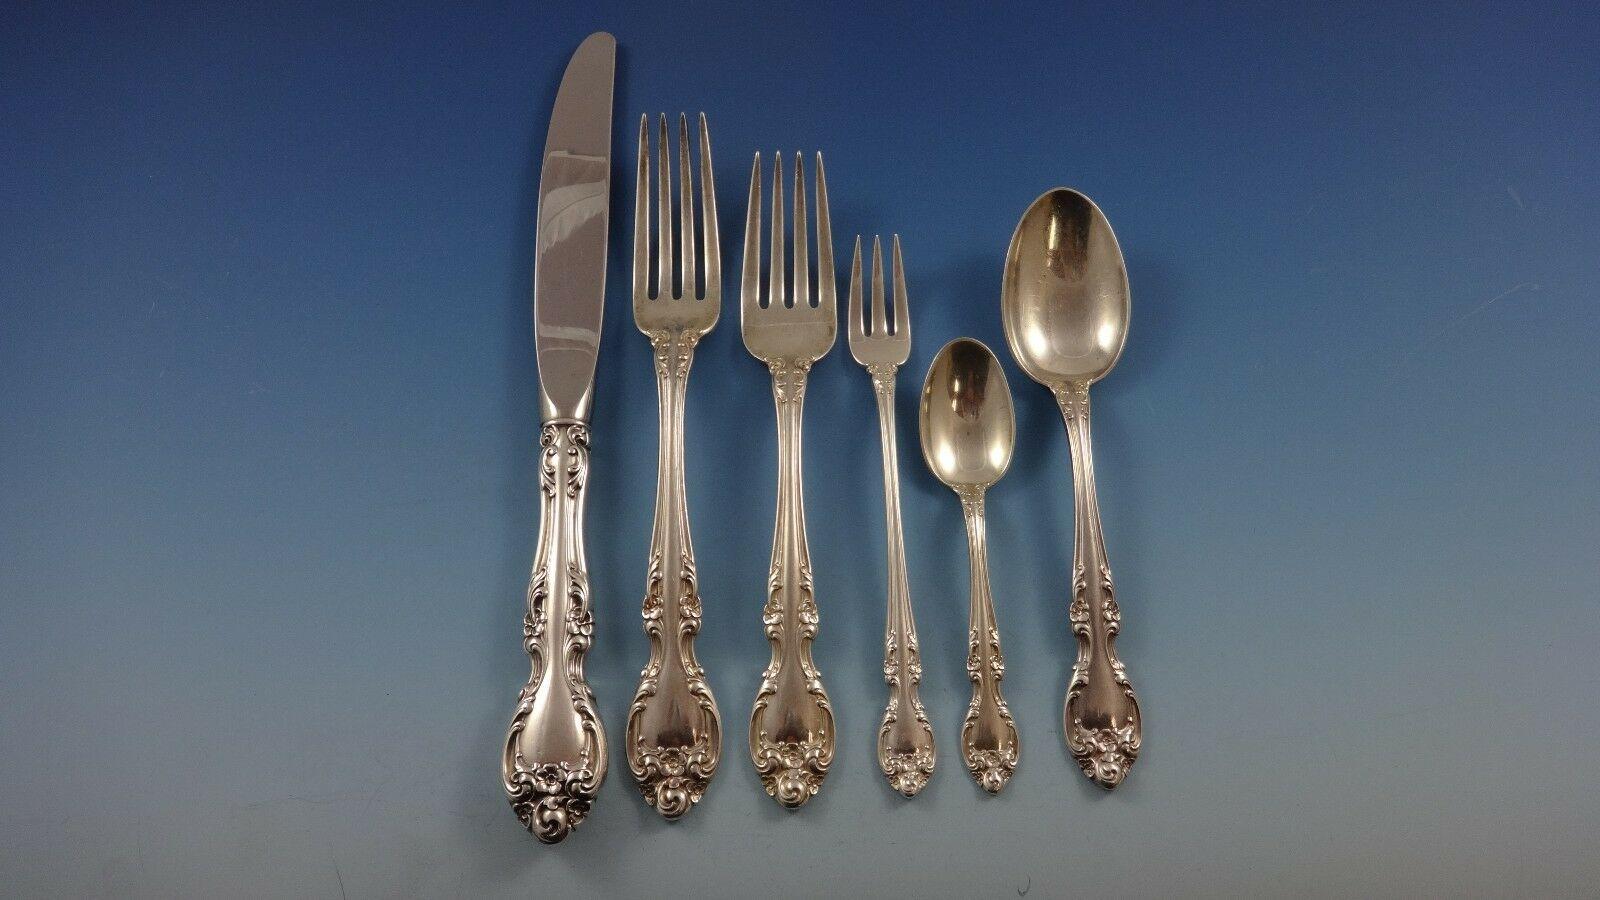 Melrose by Gorham sterling silver flatware set - 51 pieces. This set includes:

8 knives, 8 7/8